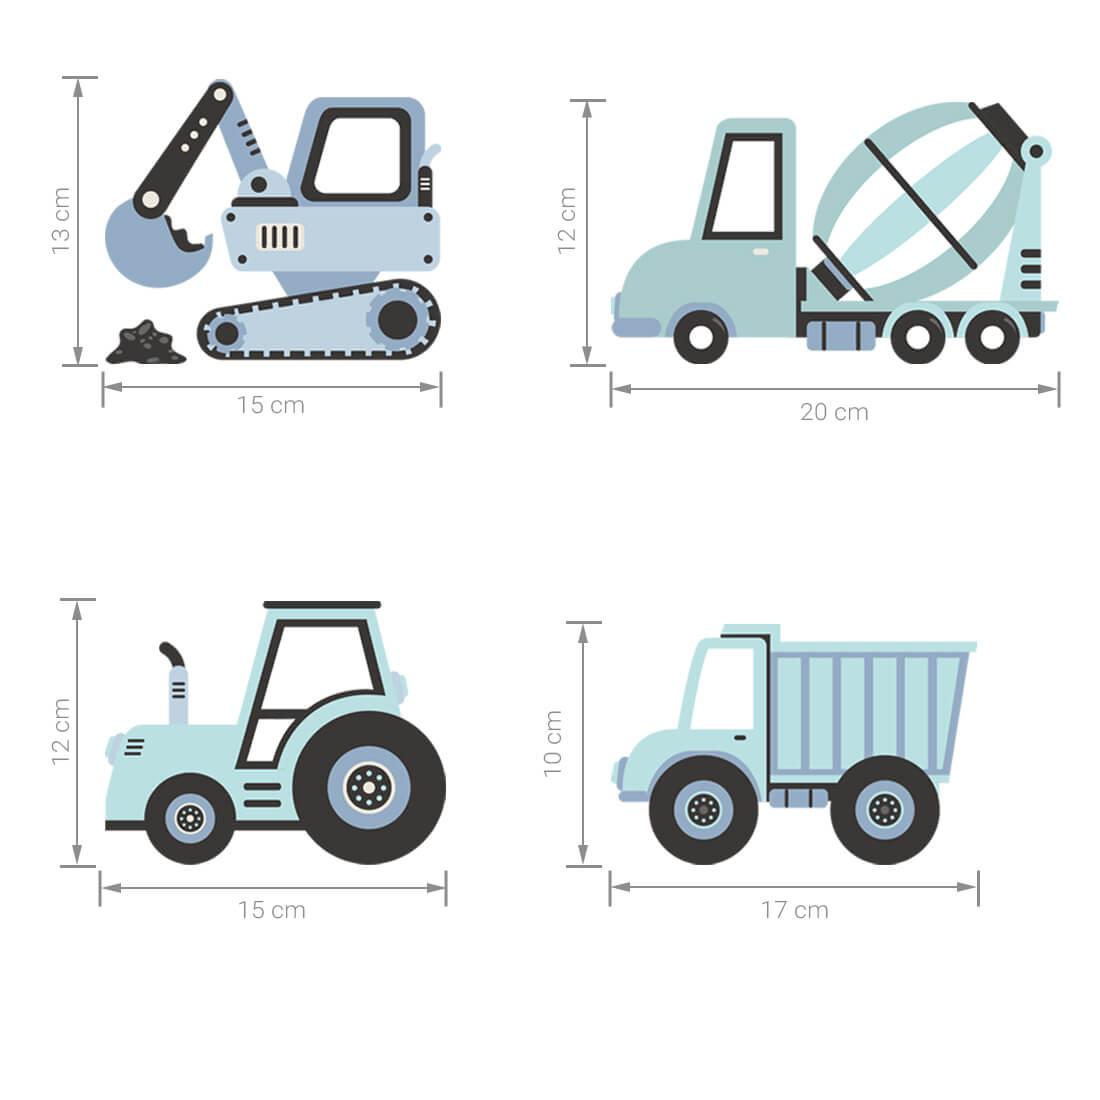 Wall Stickers - Blue Construction Vehicles